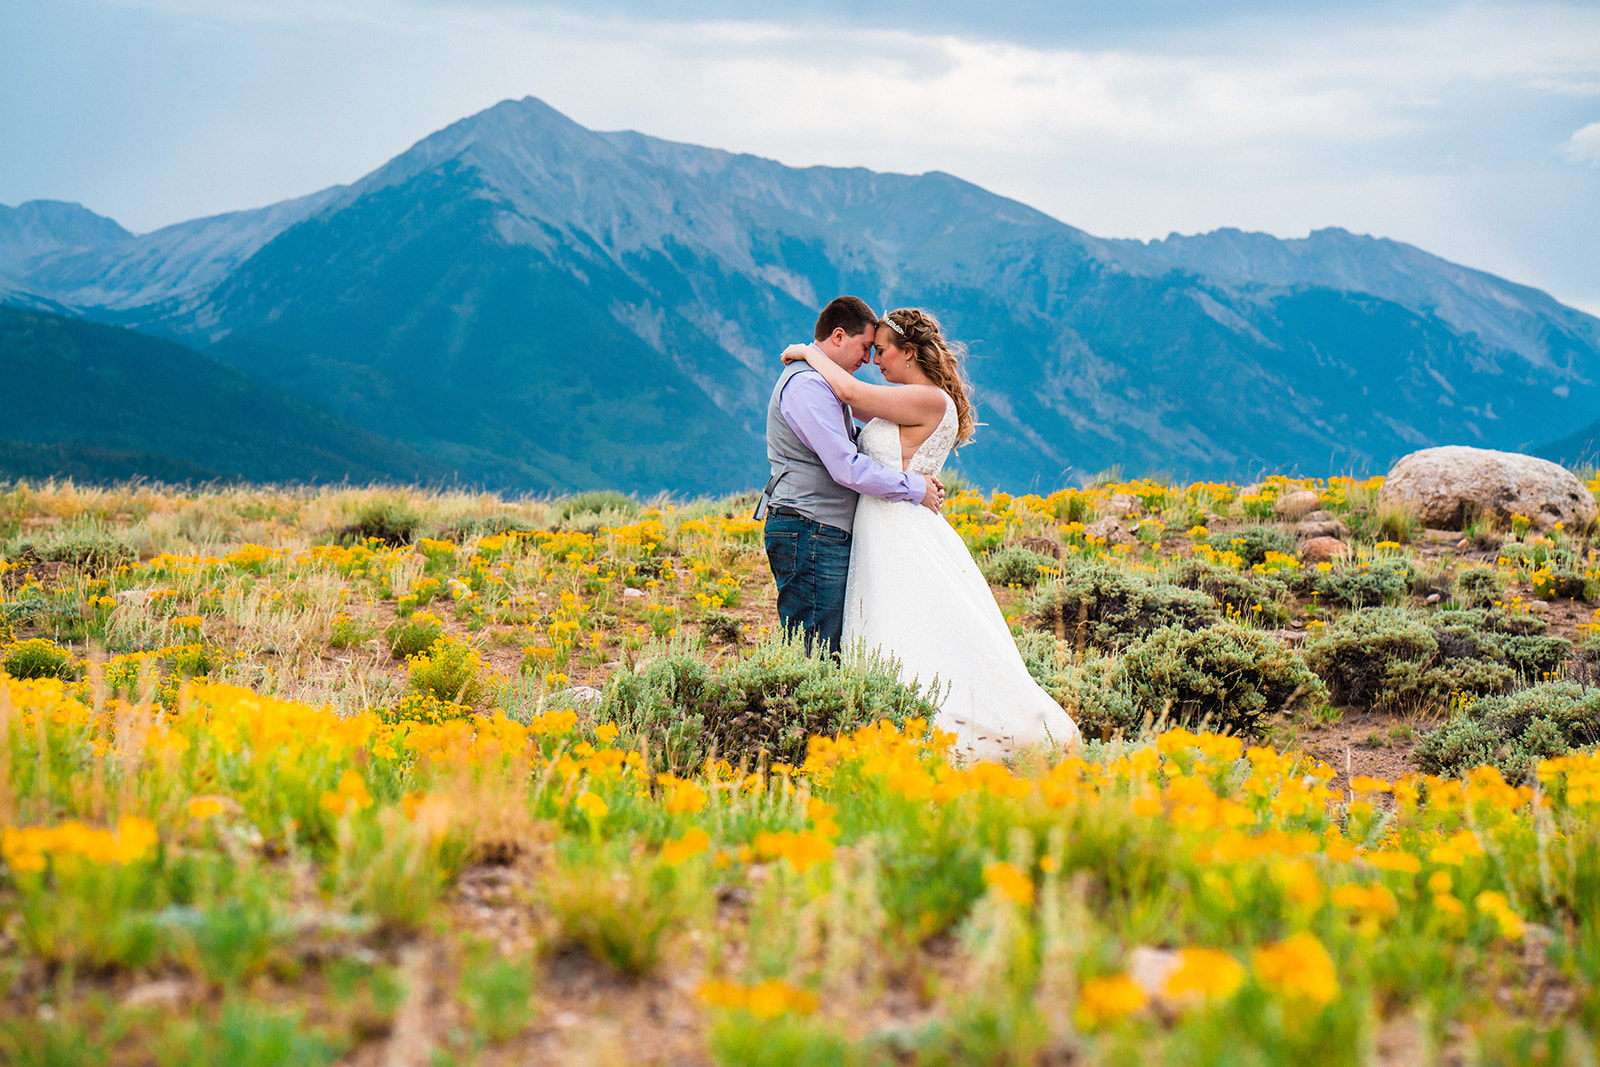 A bride and groom snuggle in mountain pasture adorned with hundreds of yellow wildflowers with tall and wide mountains behind them under a cloudy sky at Twin Lakes during their Buena Vista elopement in Colorado.